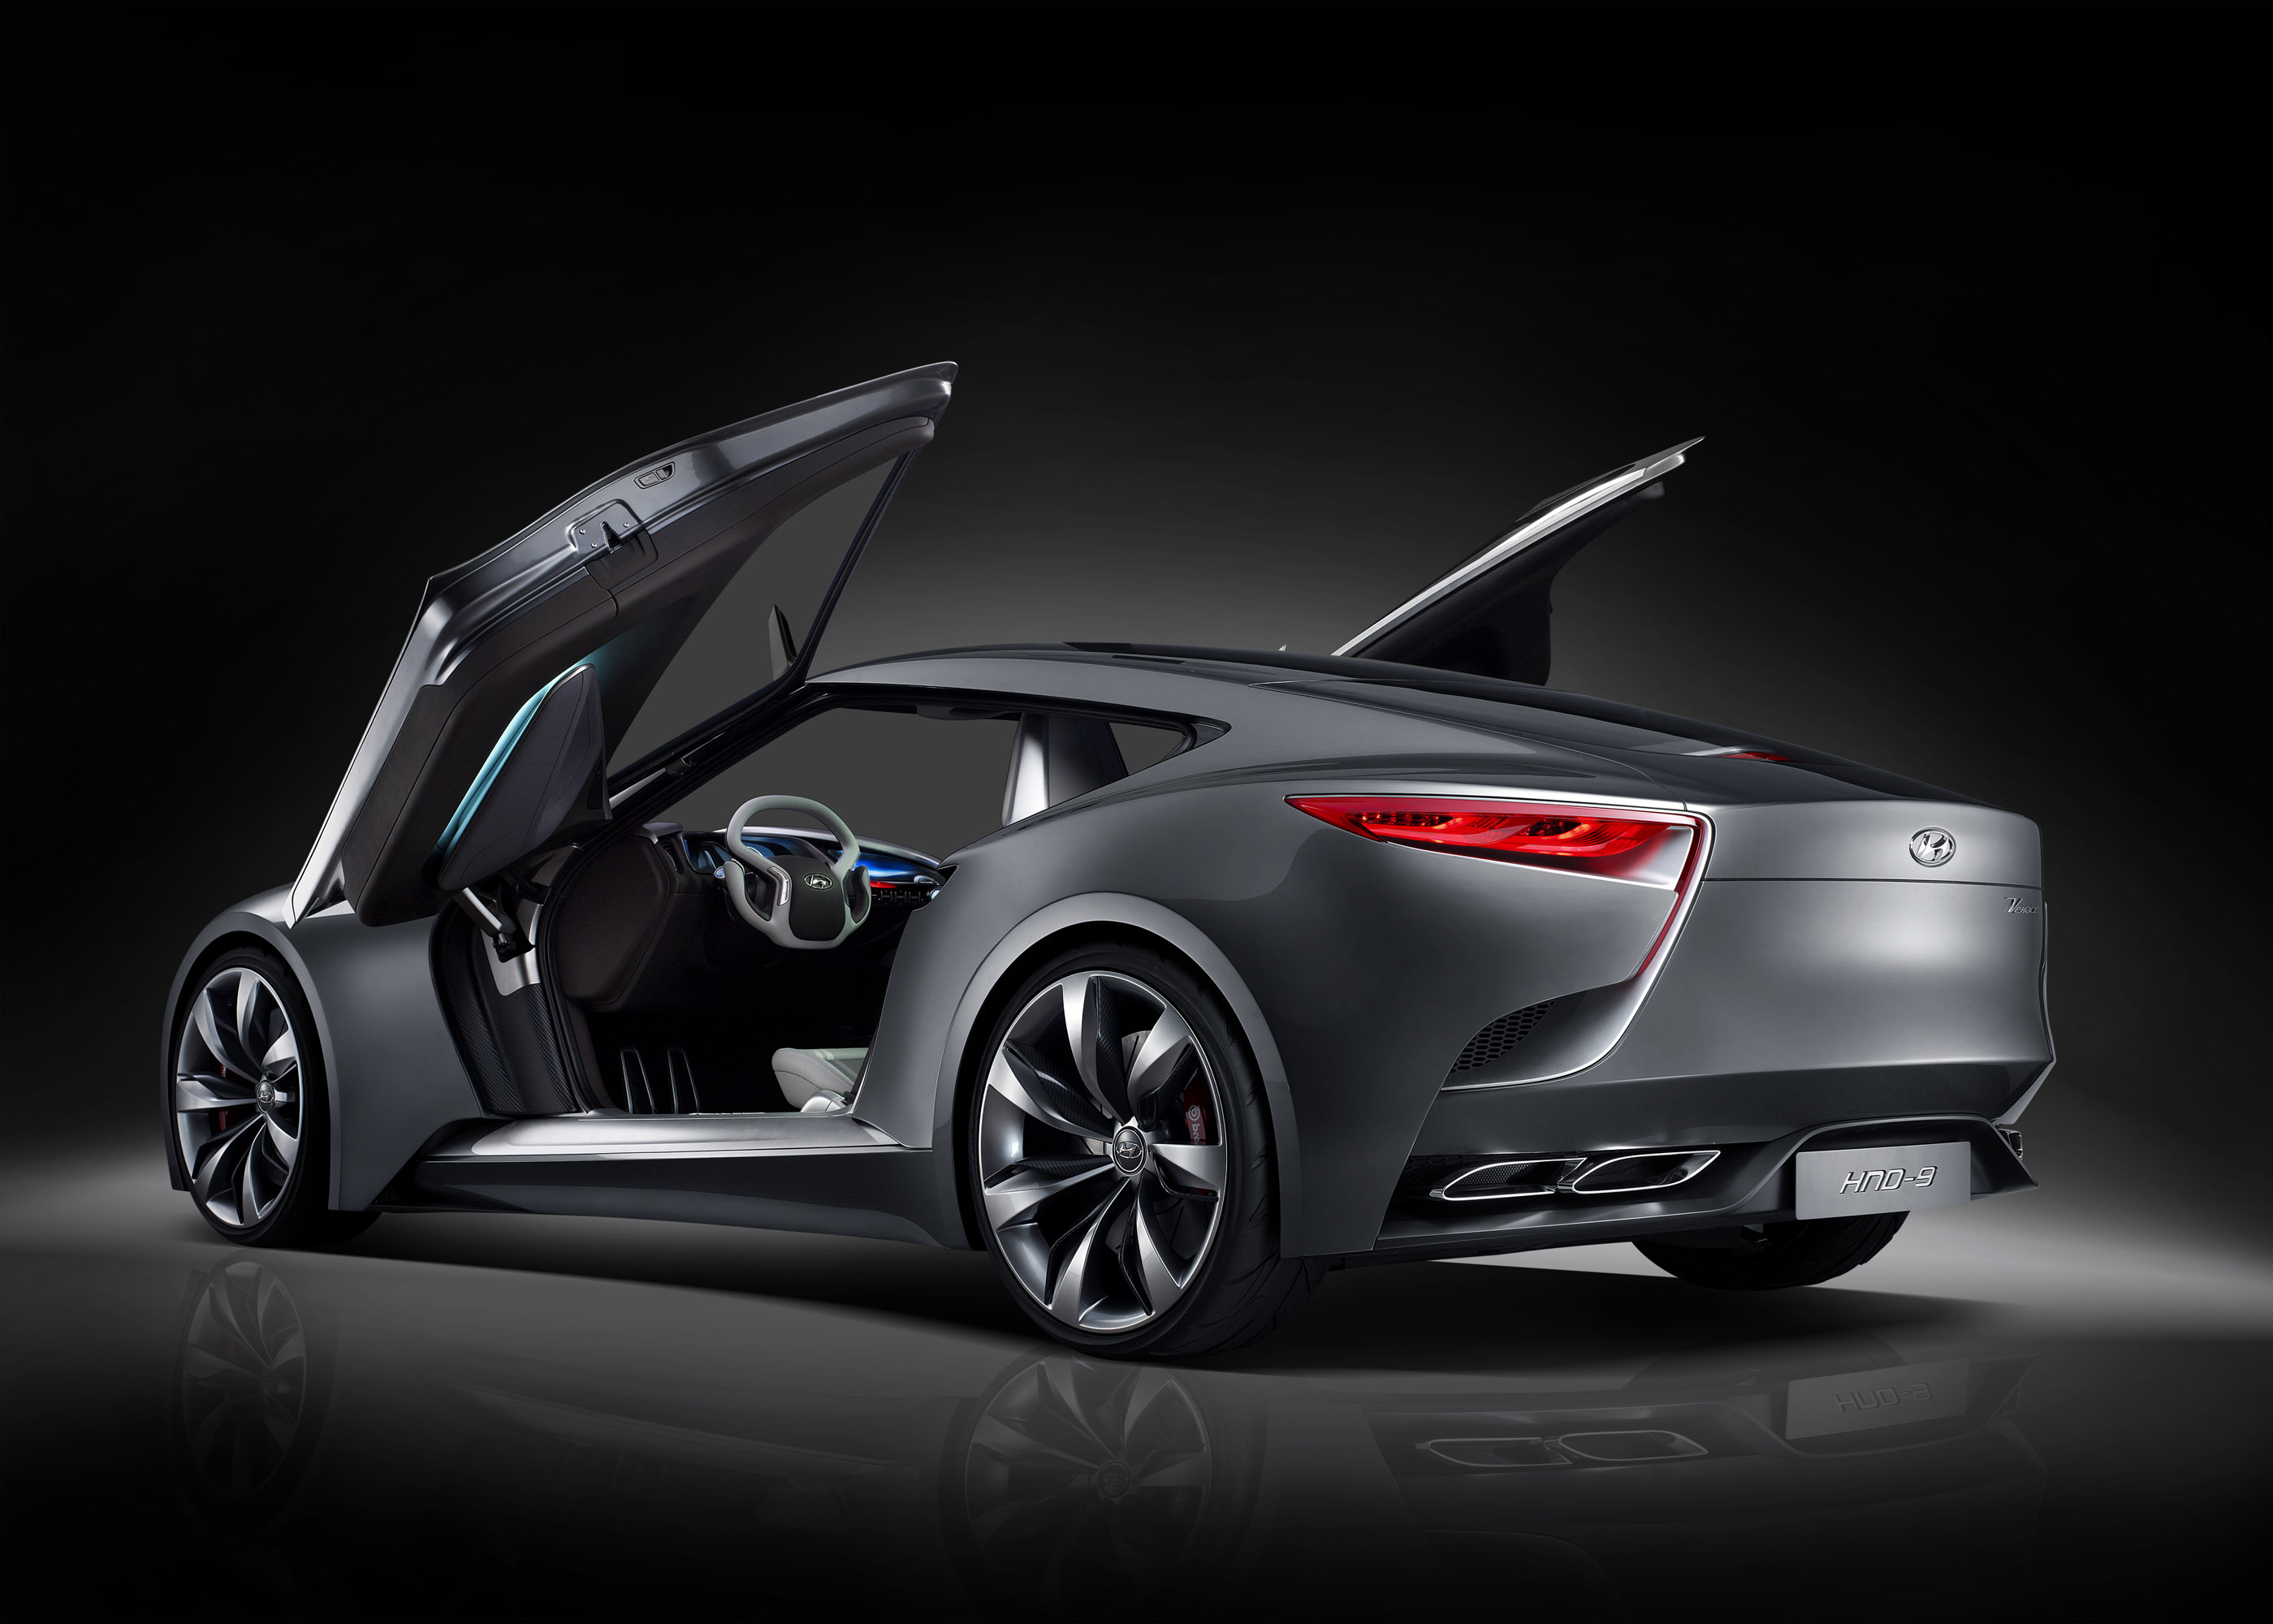 2013, Hyundai, Luxury, Sports, Coupe, Hnd 9, Concept Wallpaper